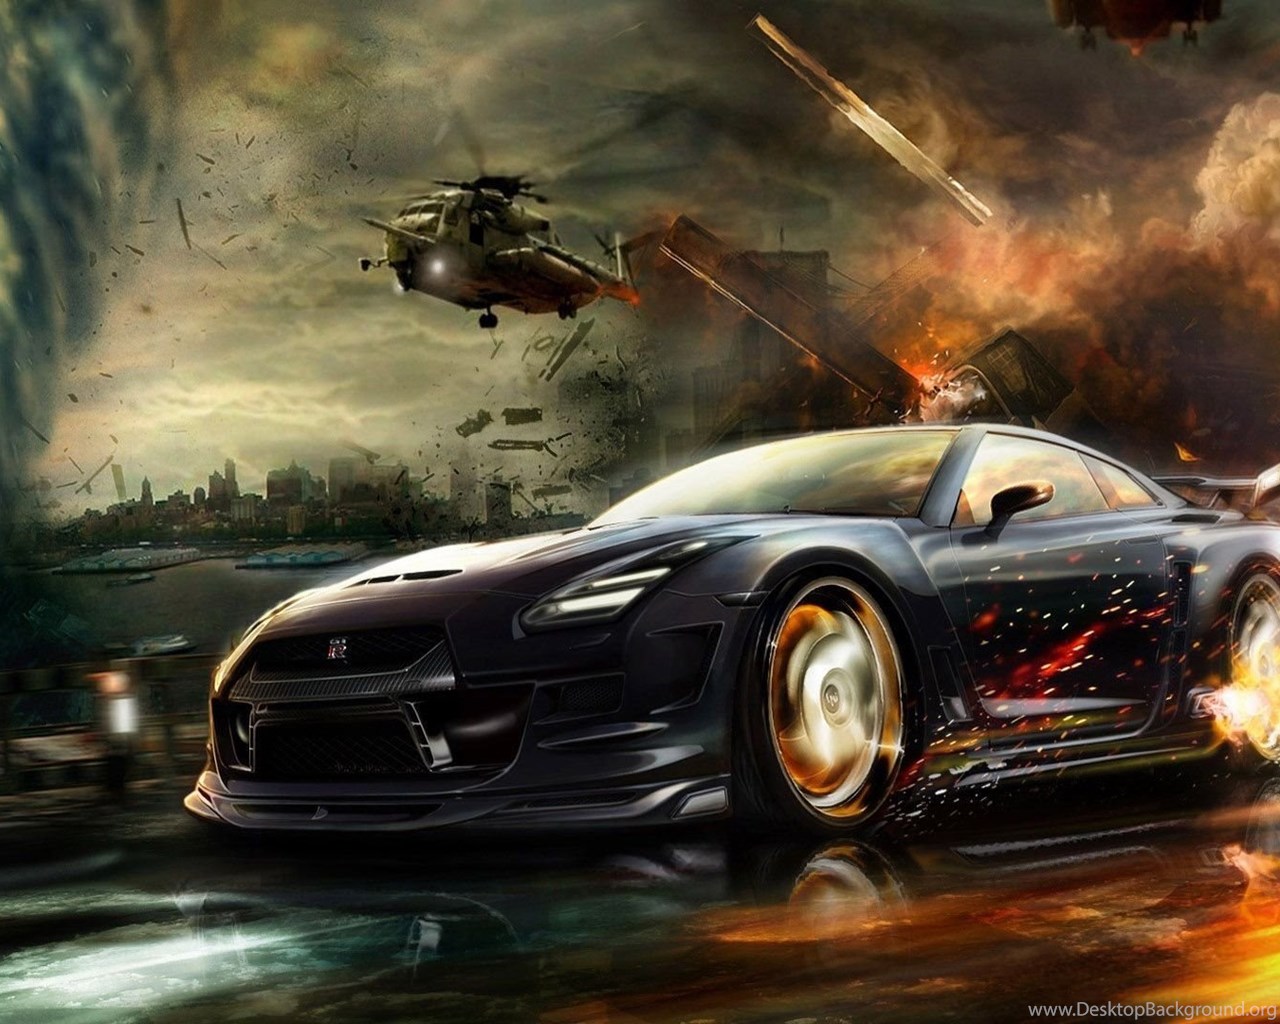 Animated Cars Wallpapers Animated Car Hd Wallpapers Cars Desktop